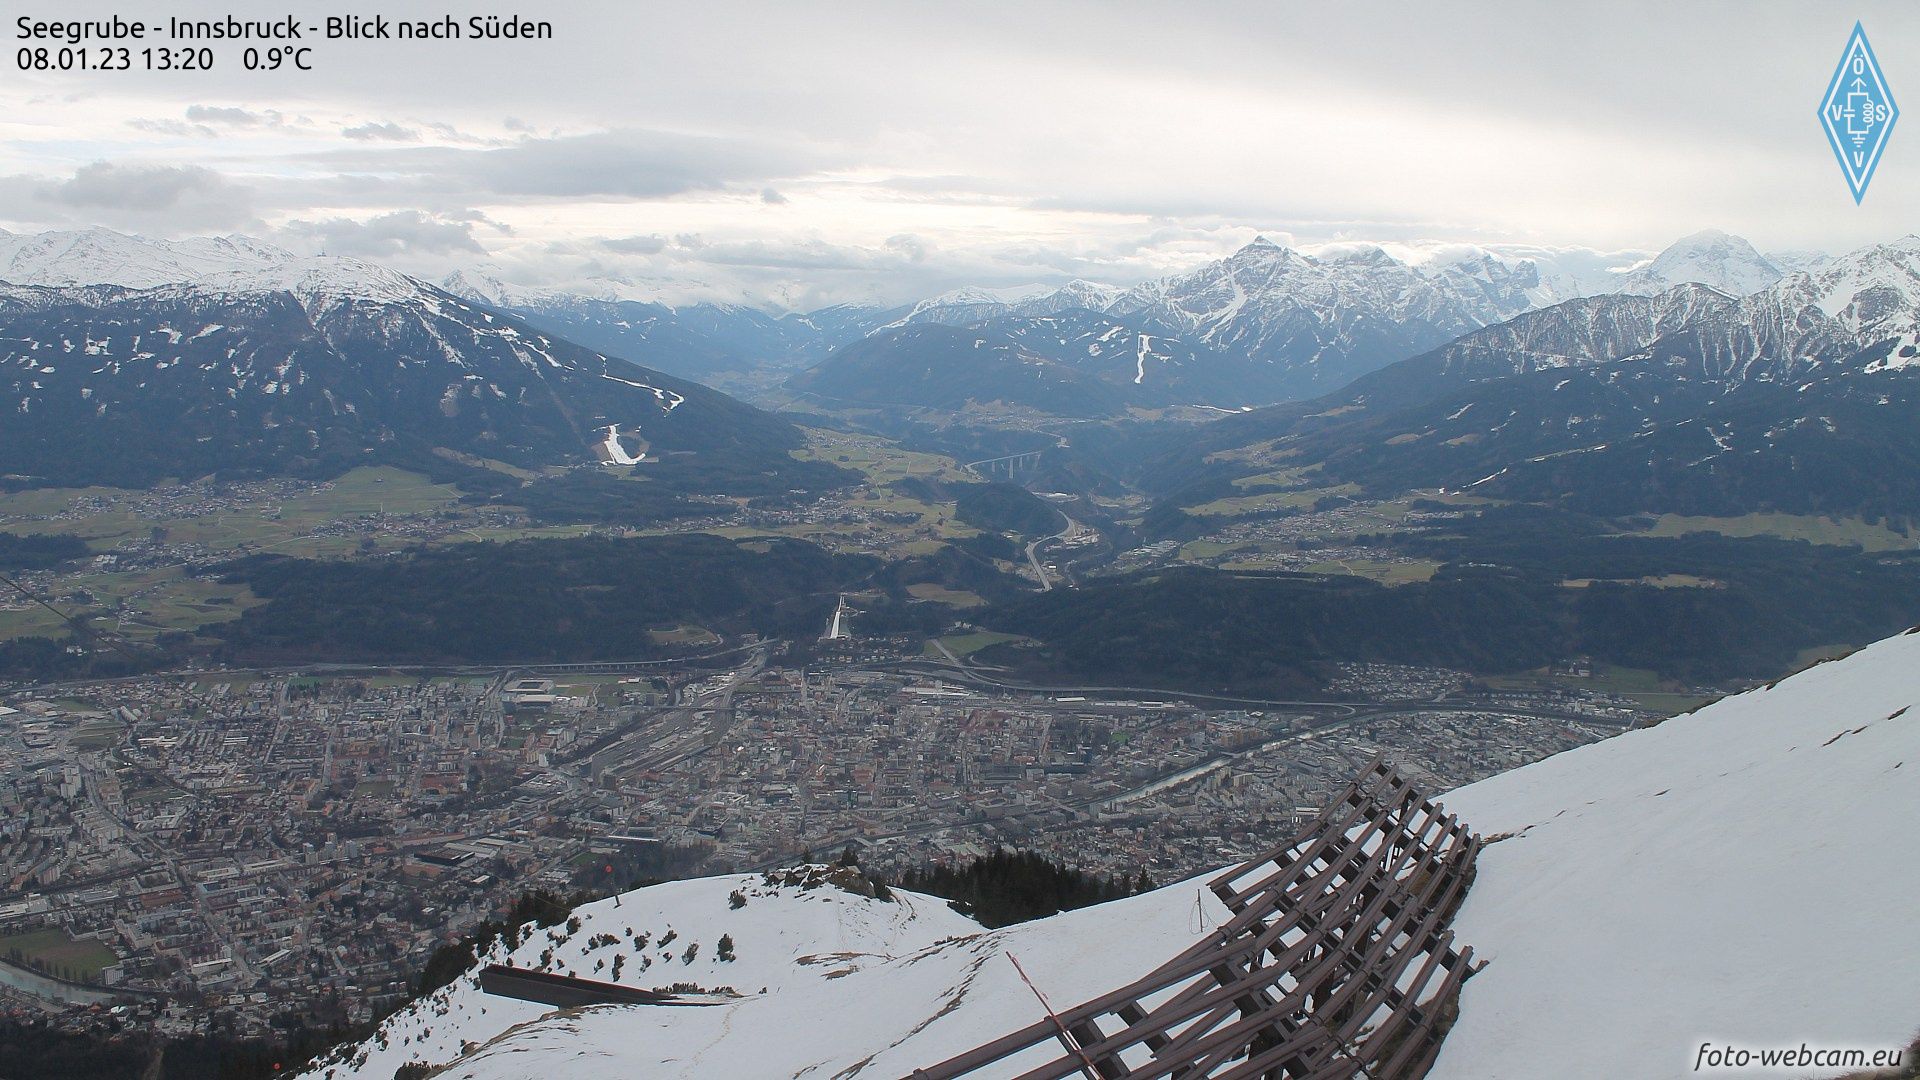 Föhny on the northern side of the Alps, like here in Innsbruck